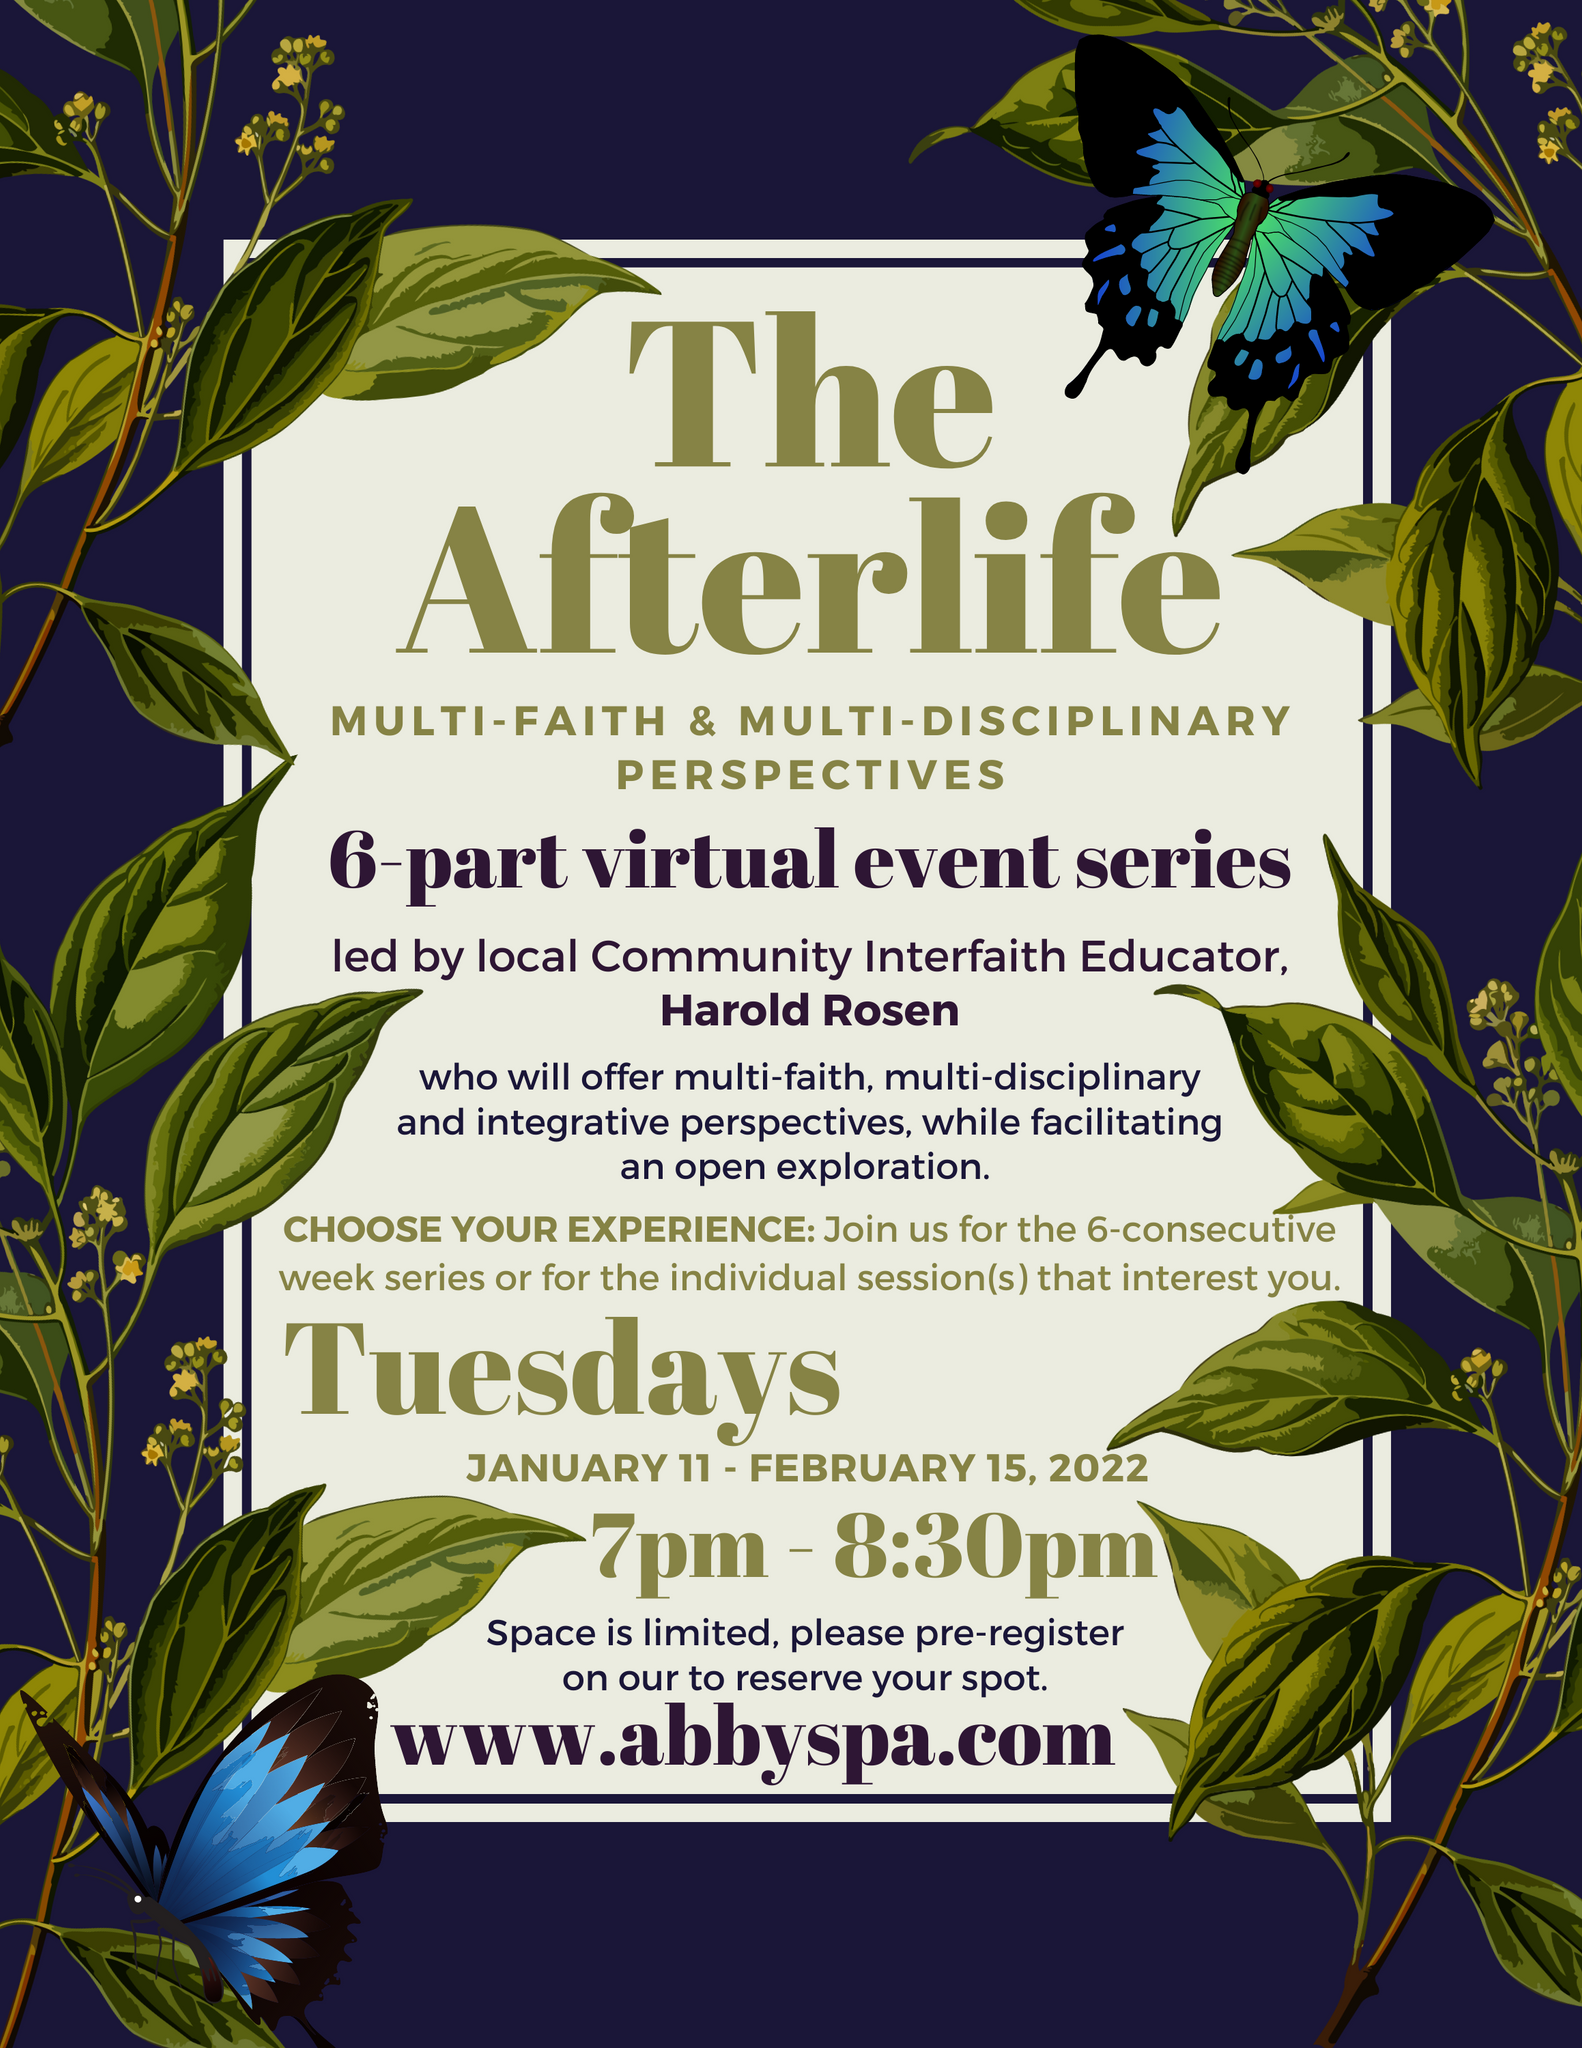 “The Afterlife: Multi-Faith & Multi-Disciplinary Perspectives” 6-Week Virtual Series (FULL SERIES TICKET)